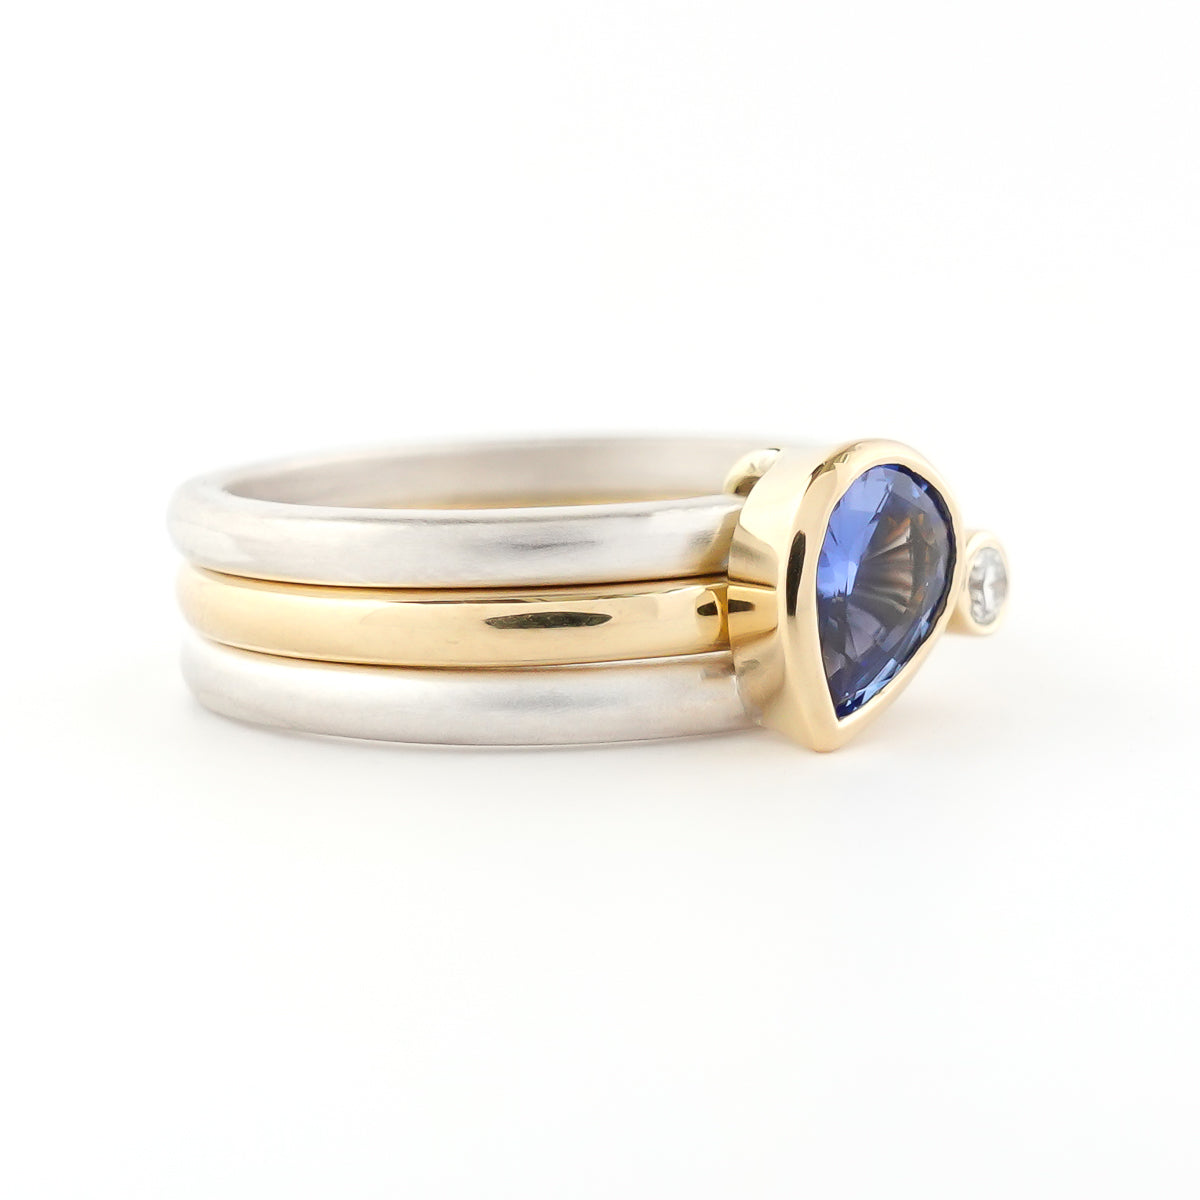 A contemporary bespoke unique aquamarine and diamond gold and silver ring by Sue Lane